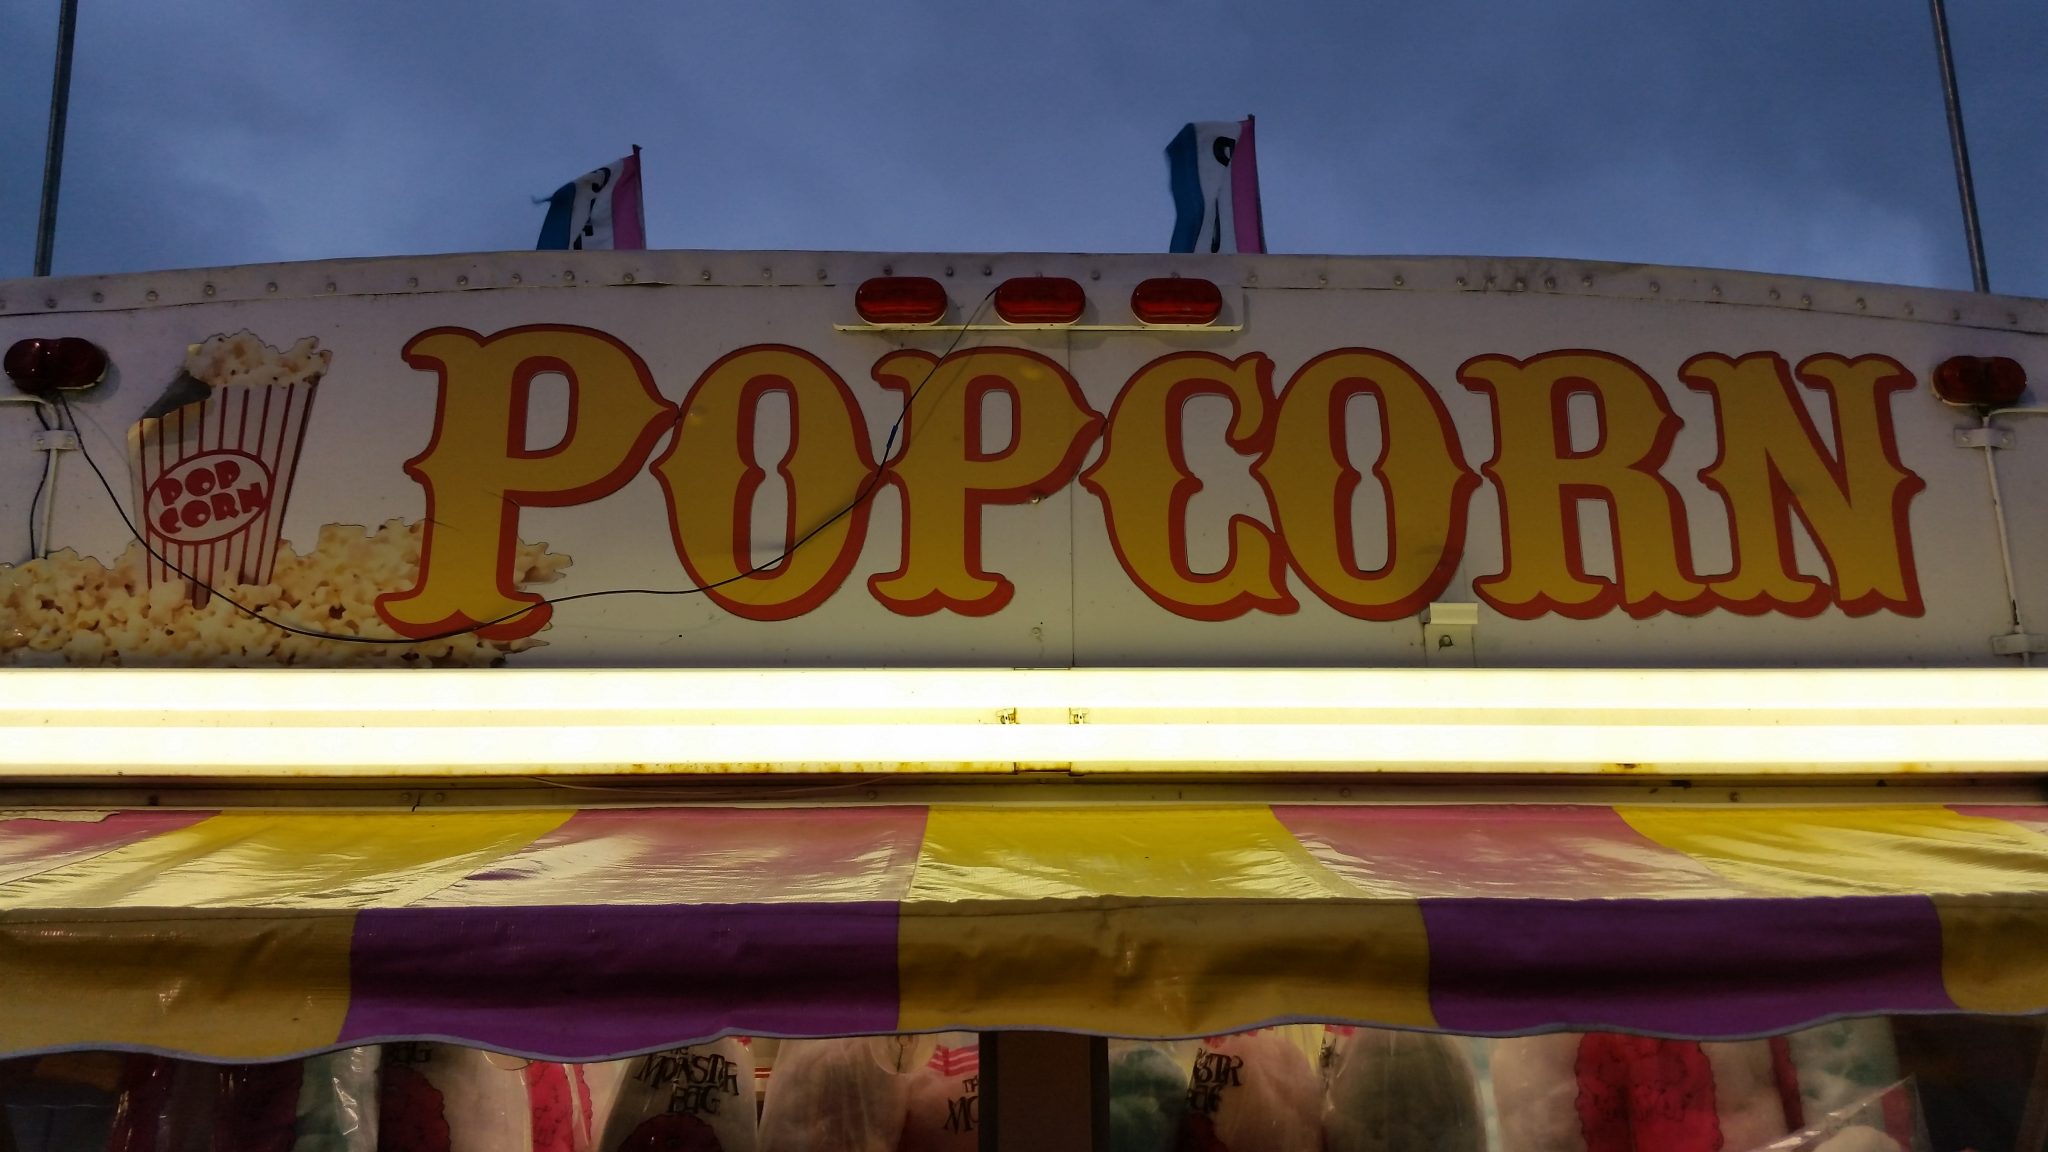 Popcorn sign at the county fair